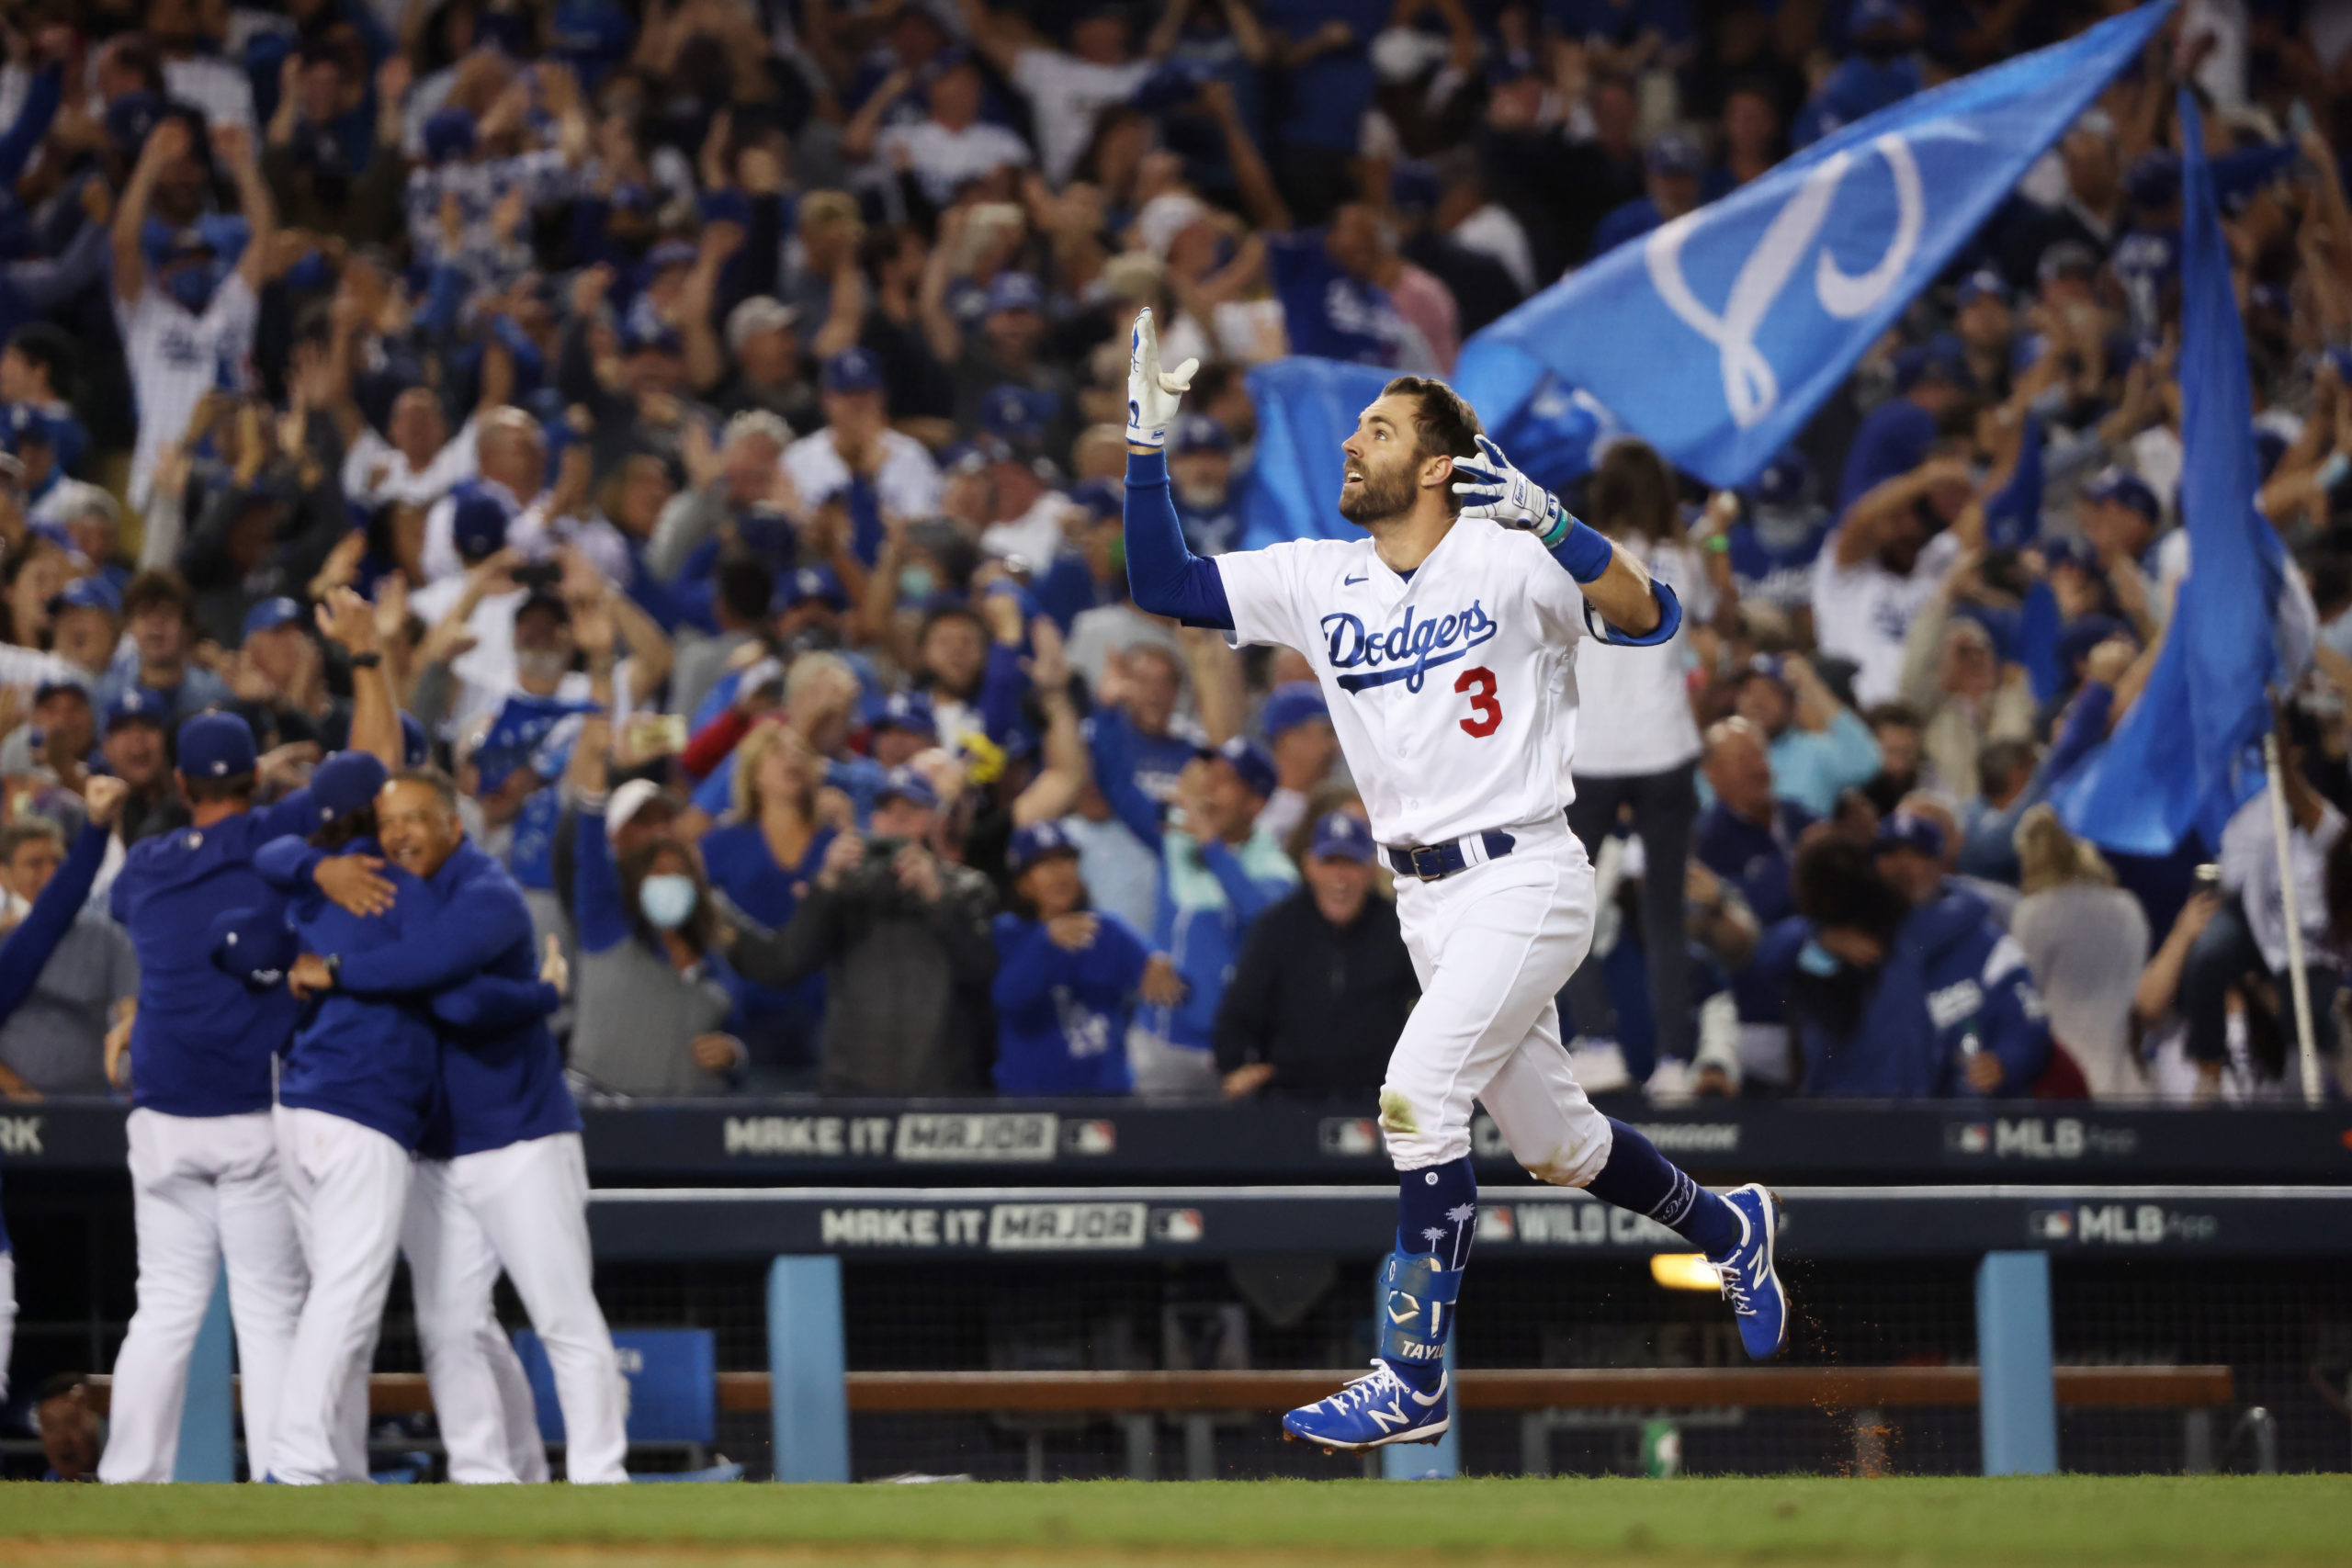 Chris Taylor’s Walk-Off Homer Sends Dodgers to NLDS in 3-1 Victory Over Cardinals in NL Wild Card Game – NBC Los Angeles